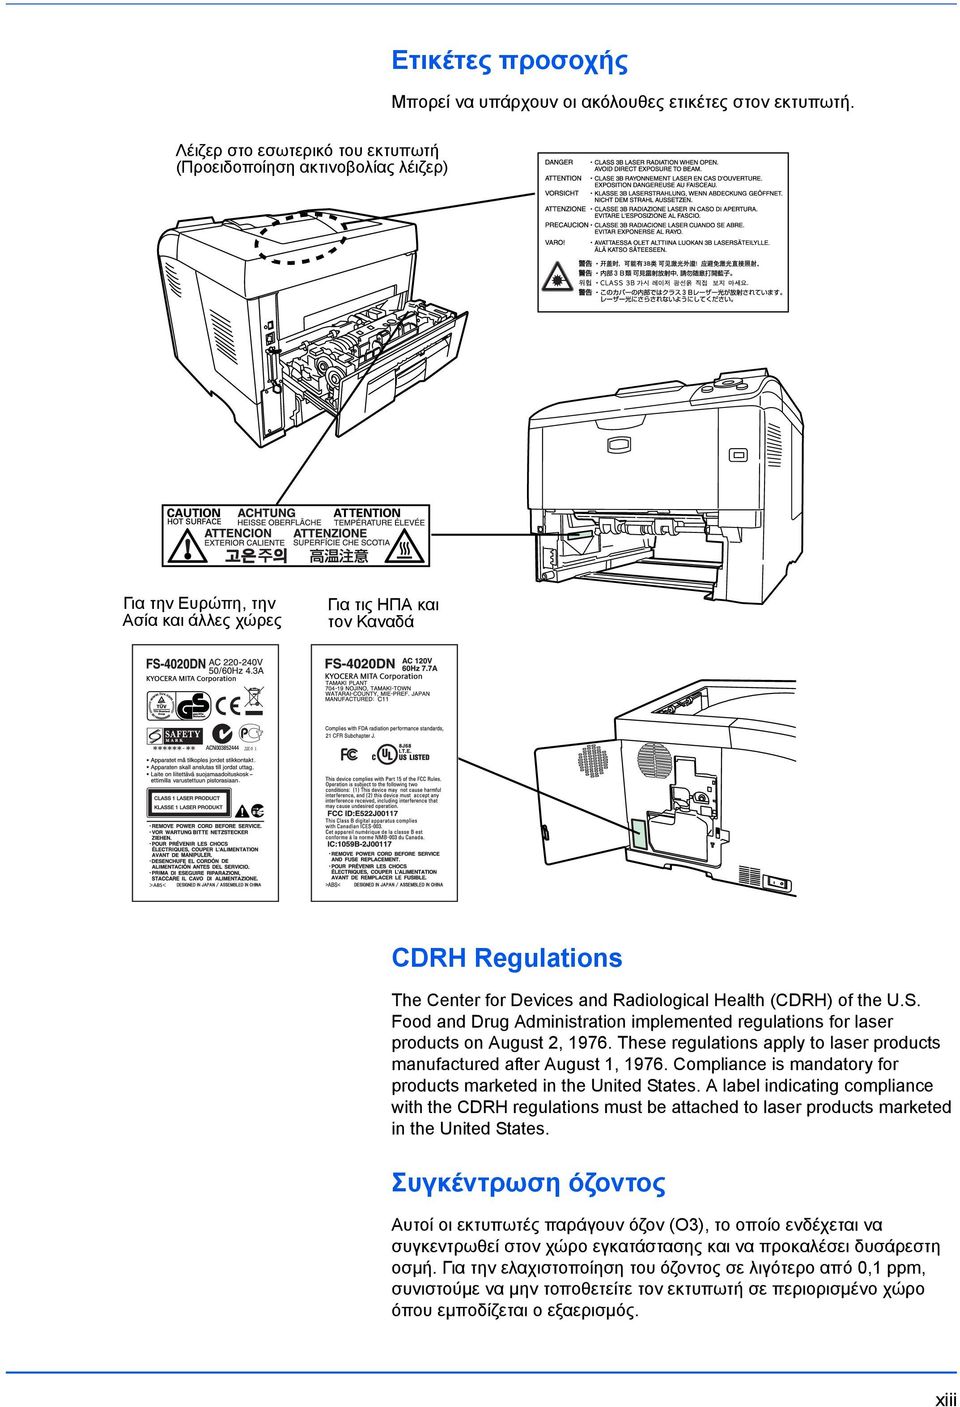 Health (CDRH) of the U.S. Food and Drug Administration implemented regulations for laser products on August 2, 1976. These regulations apply to laser products manufactured after August 1, 1976.